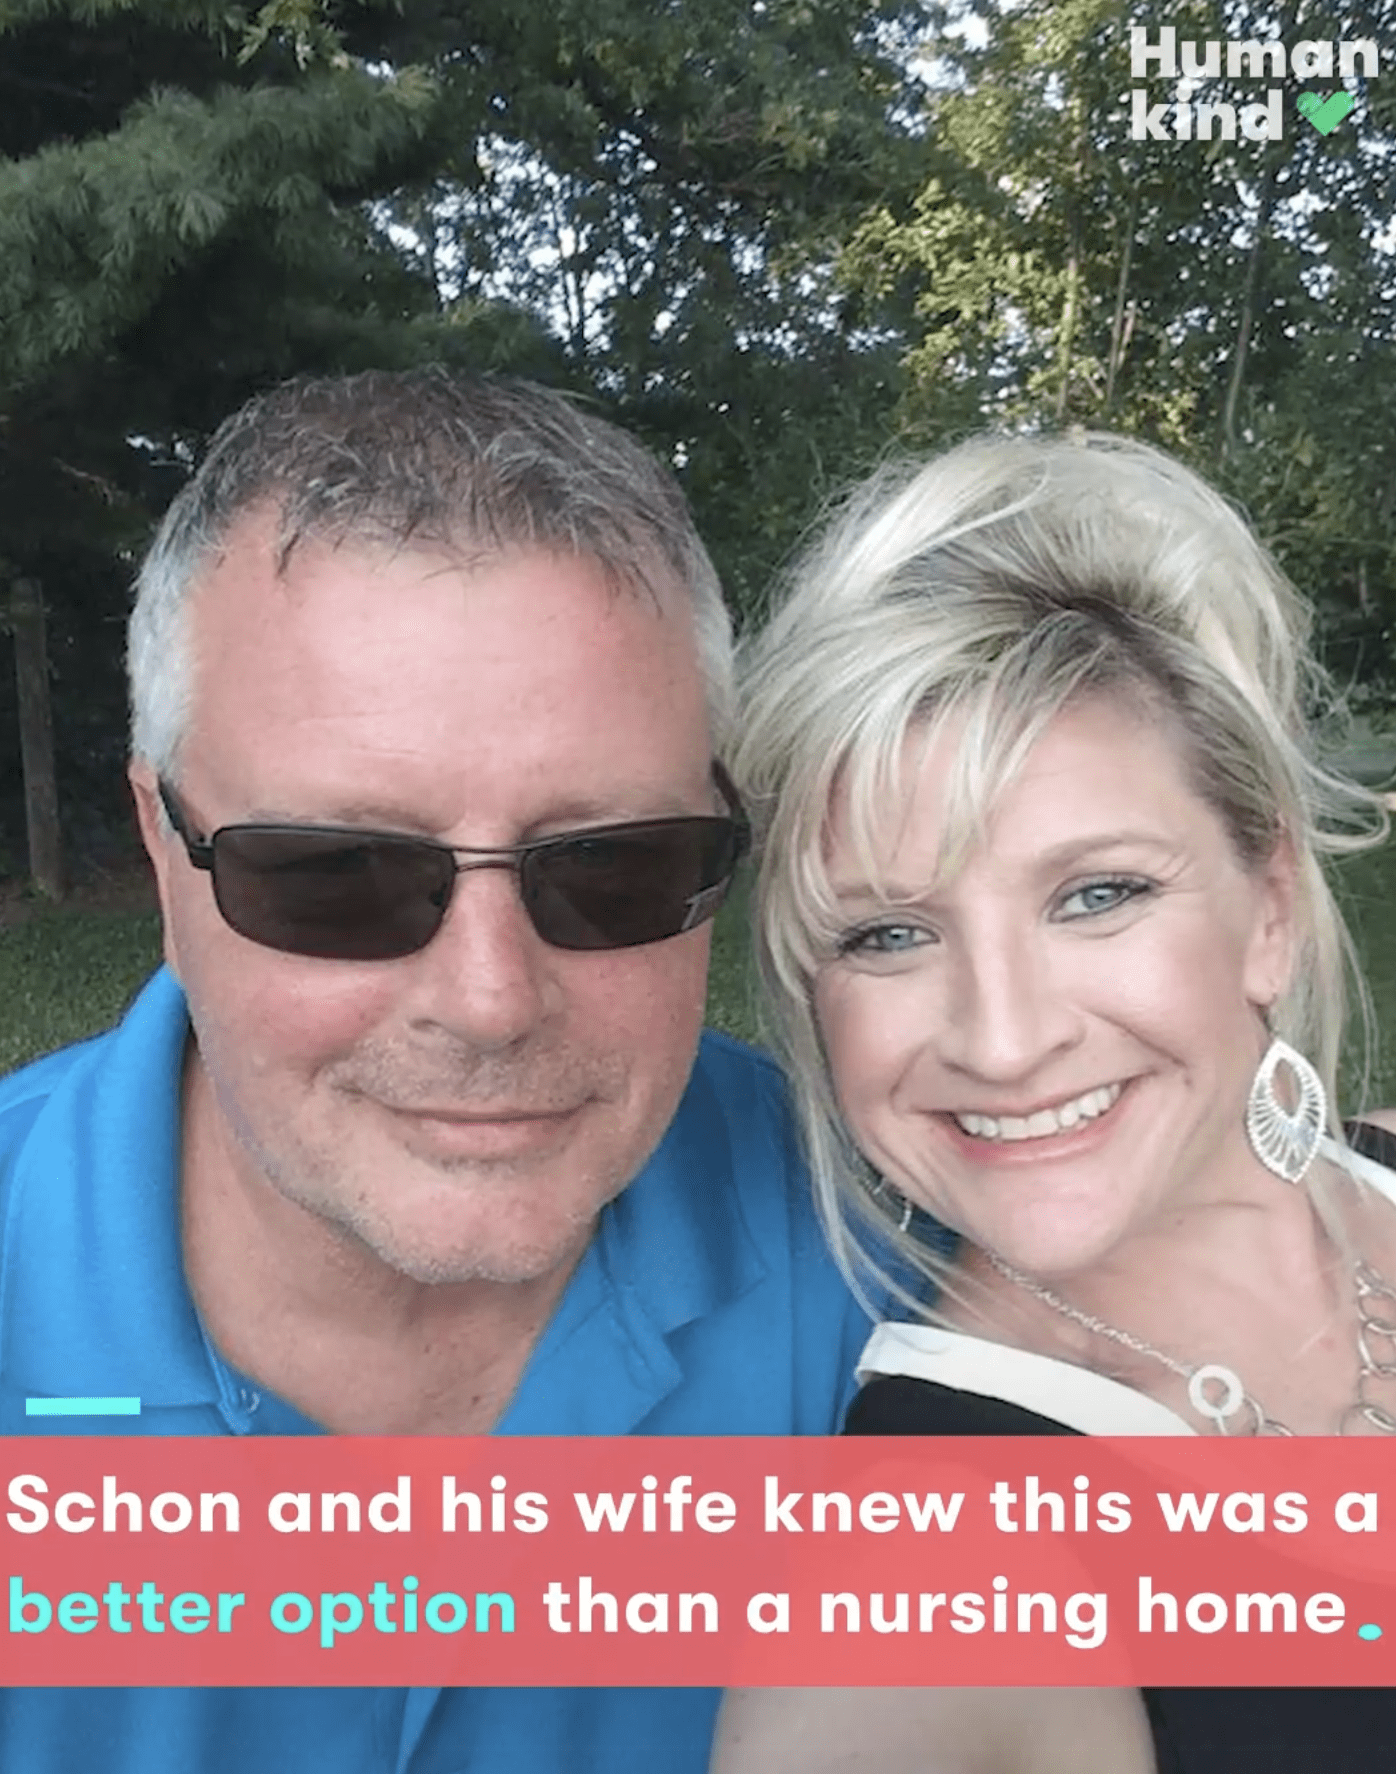 Schon pictured with his wife Jeannie. | Photo: Facebook.com/northjerseycom